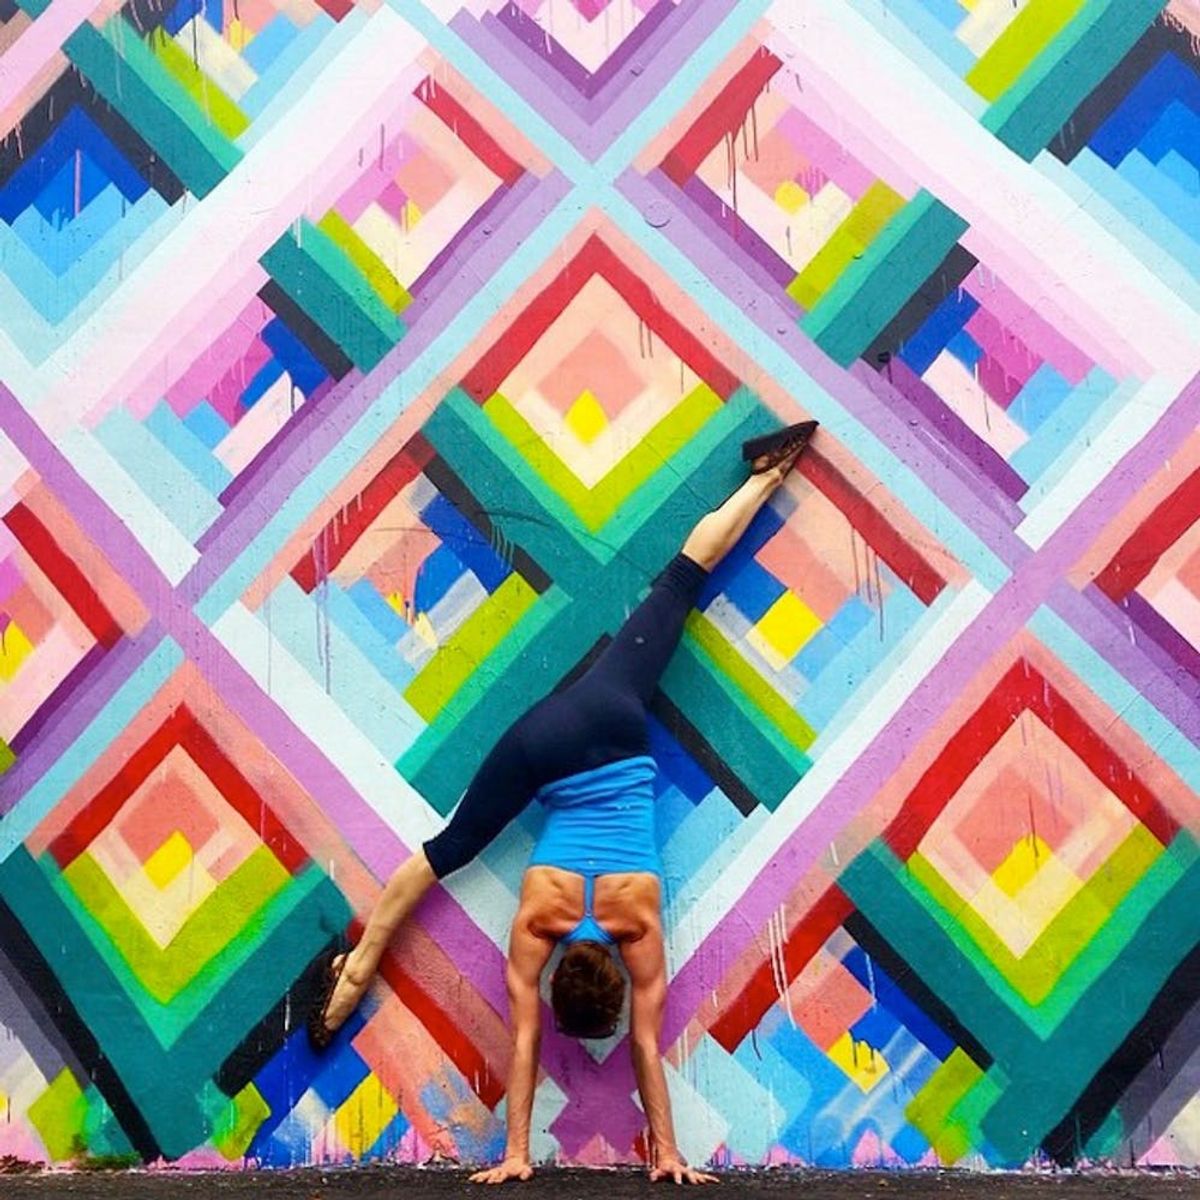 Yoga Street Art Is a Thing and It’s Awesome